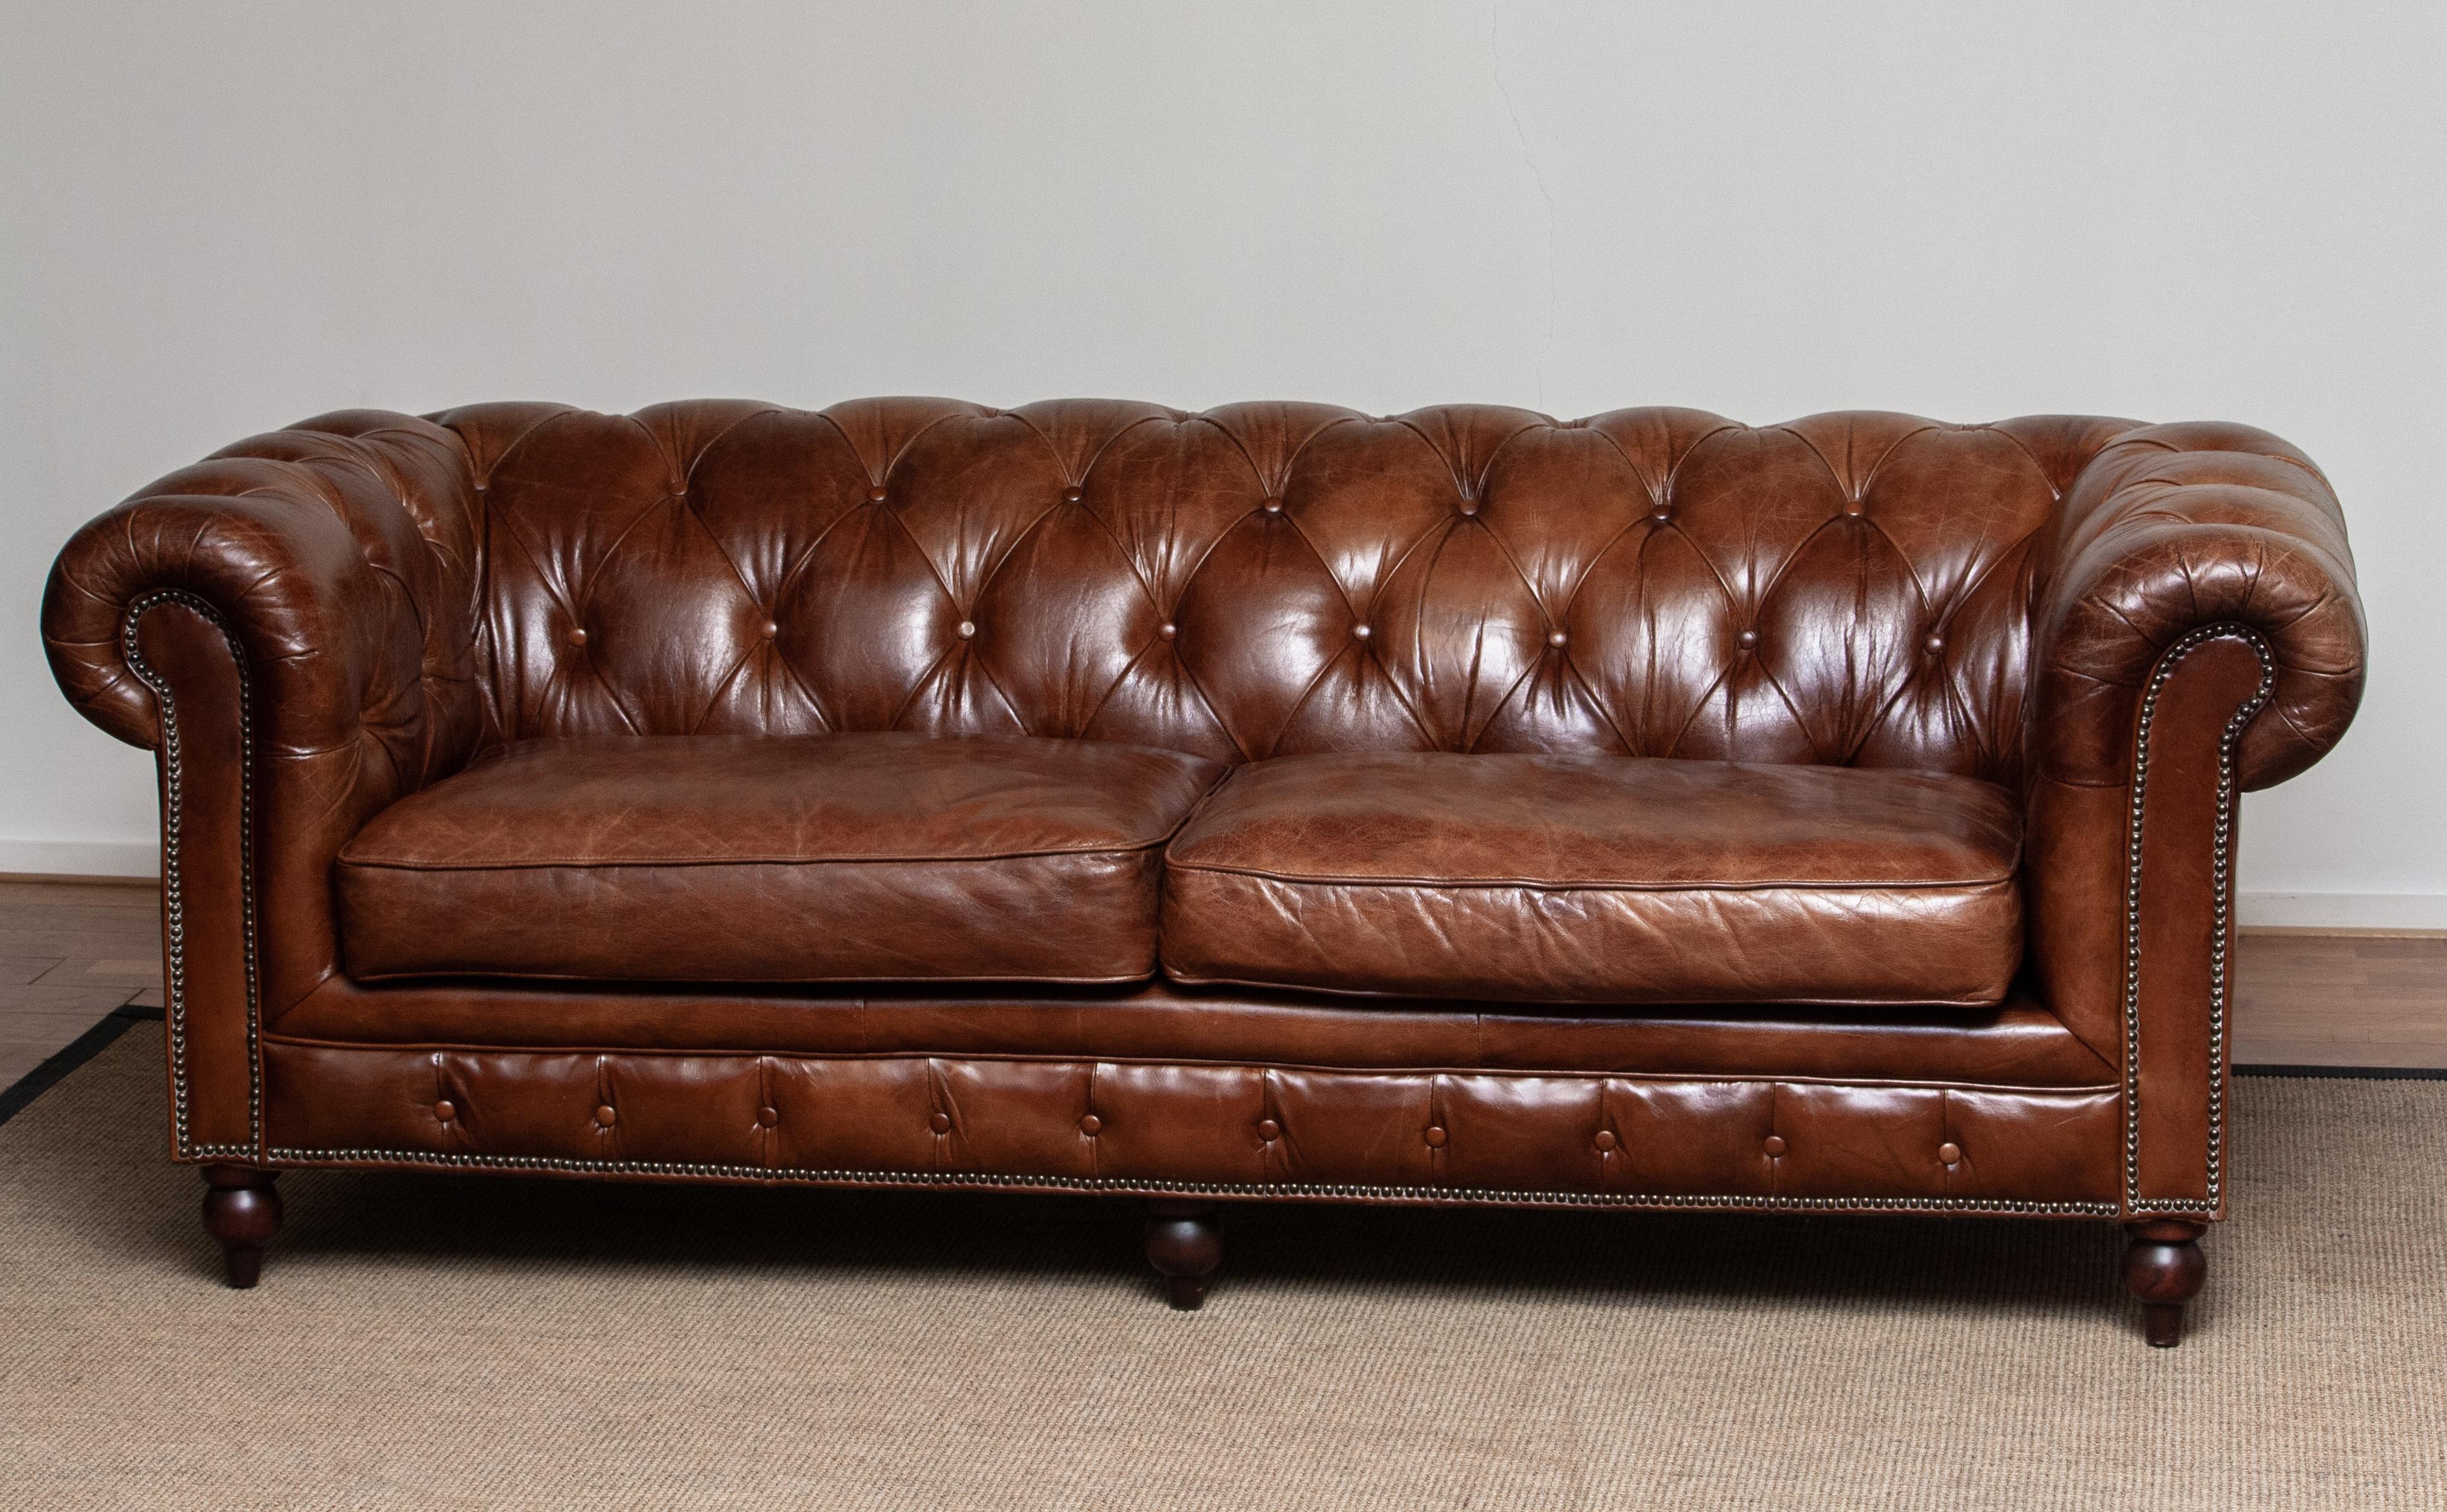 Chesterfield sofa in chocolate brown leather with a beautiful patina true the years. 
Underneath the seat cushions, filled with feather, is fully sprung therefor the seat is soft and comfortable. 
The overall condition in good.
 